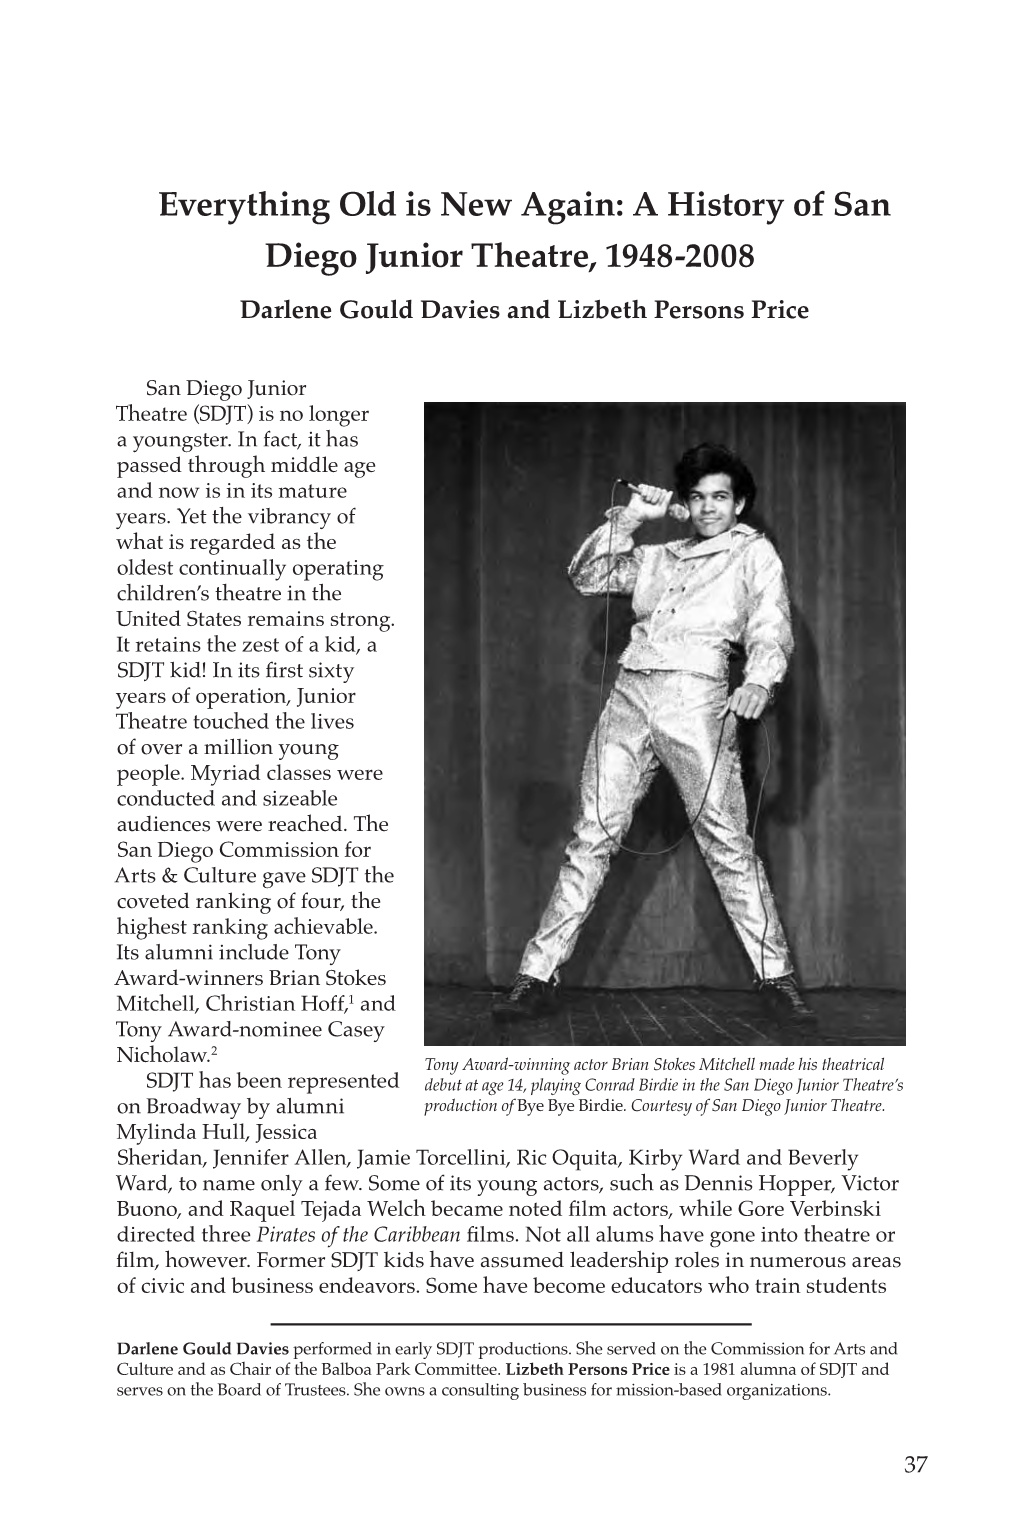 A History of San Diego Junior Theatre, 1948-2008 Darlene Gould Davies and Lizbeth Persons Price